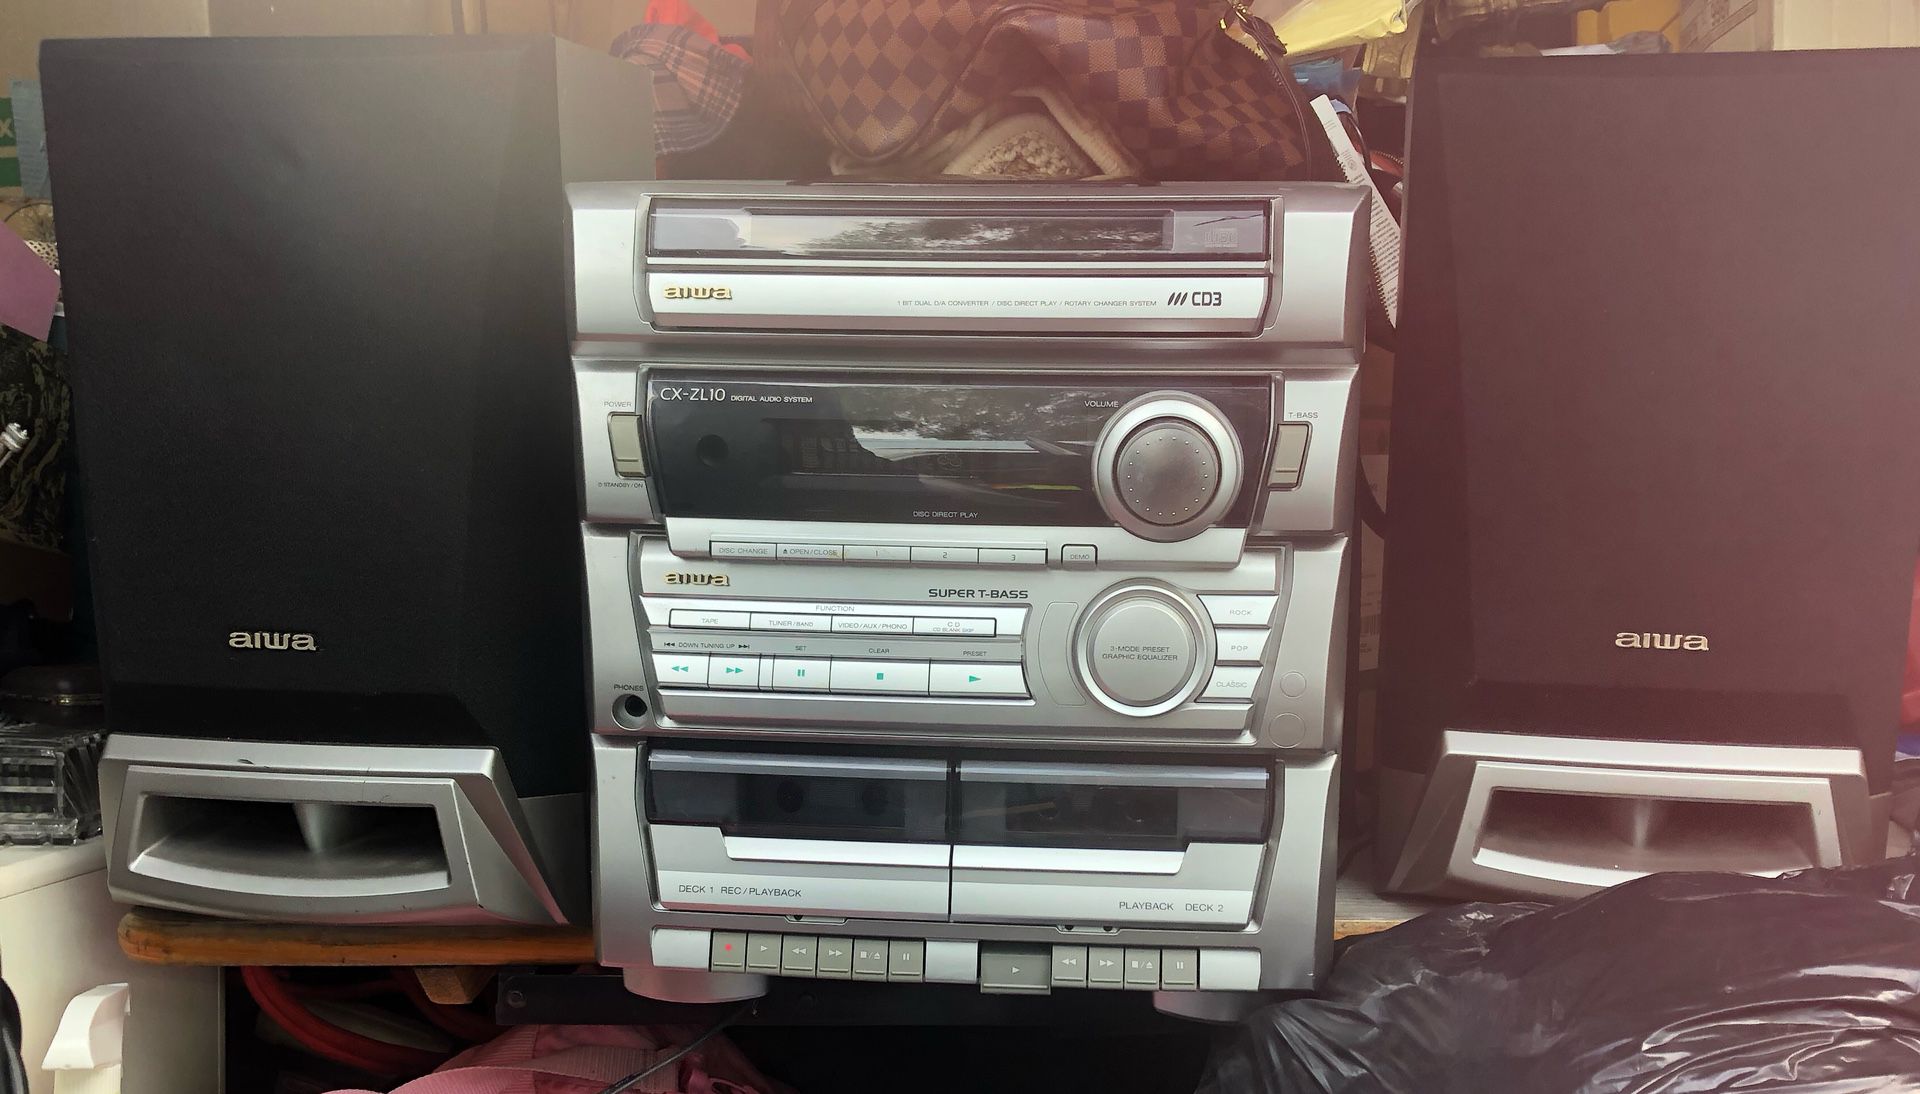 House Stereo Three CD player and cassette